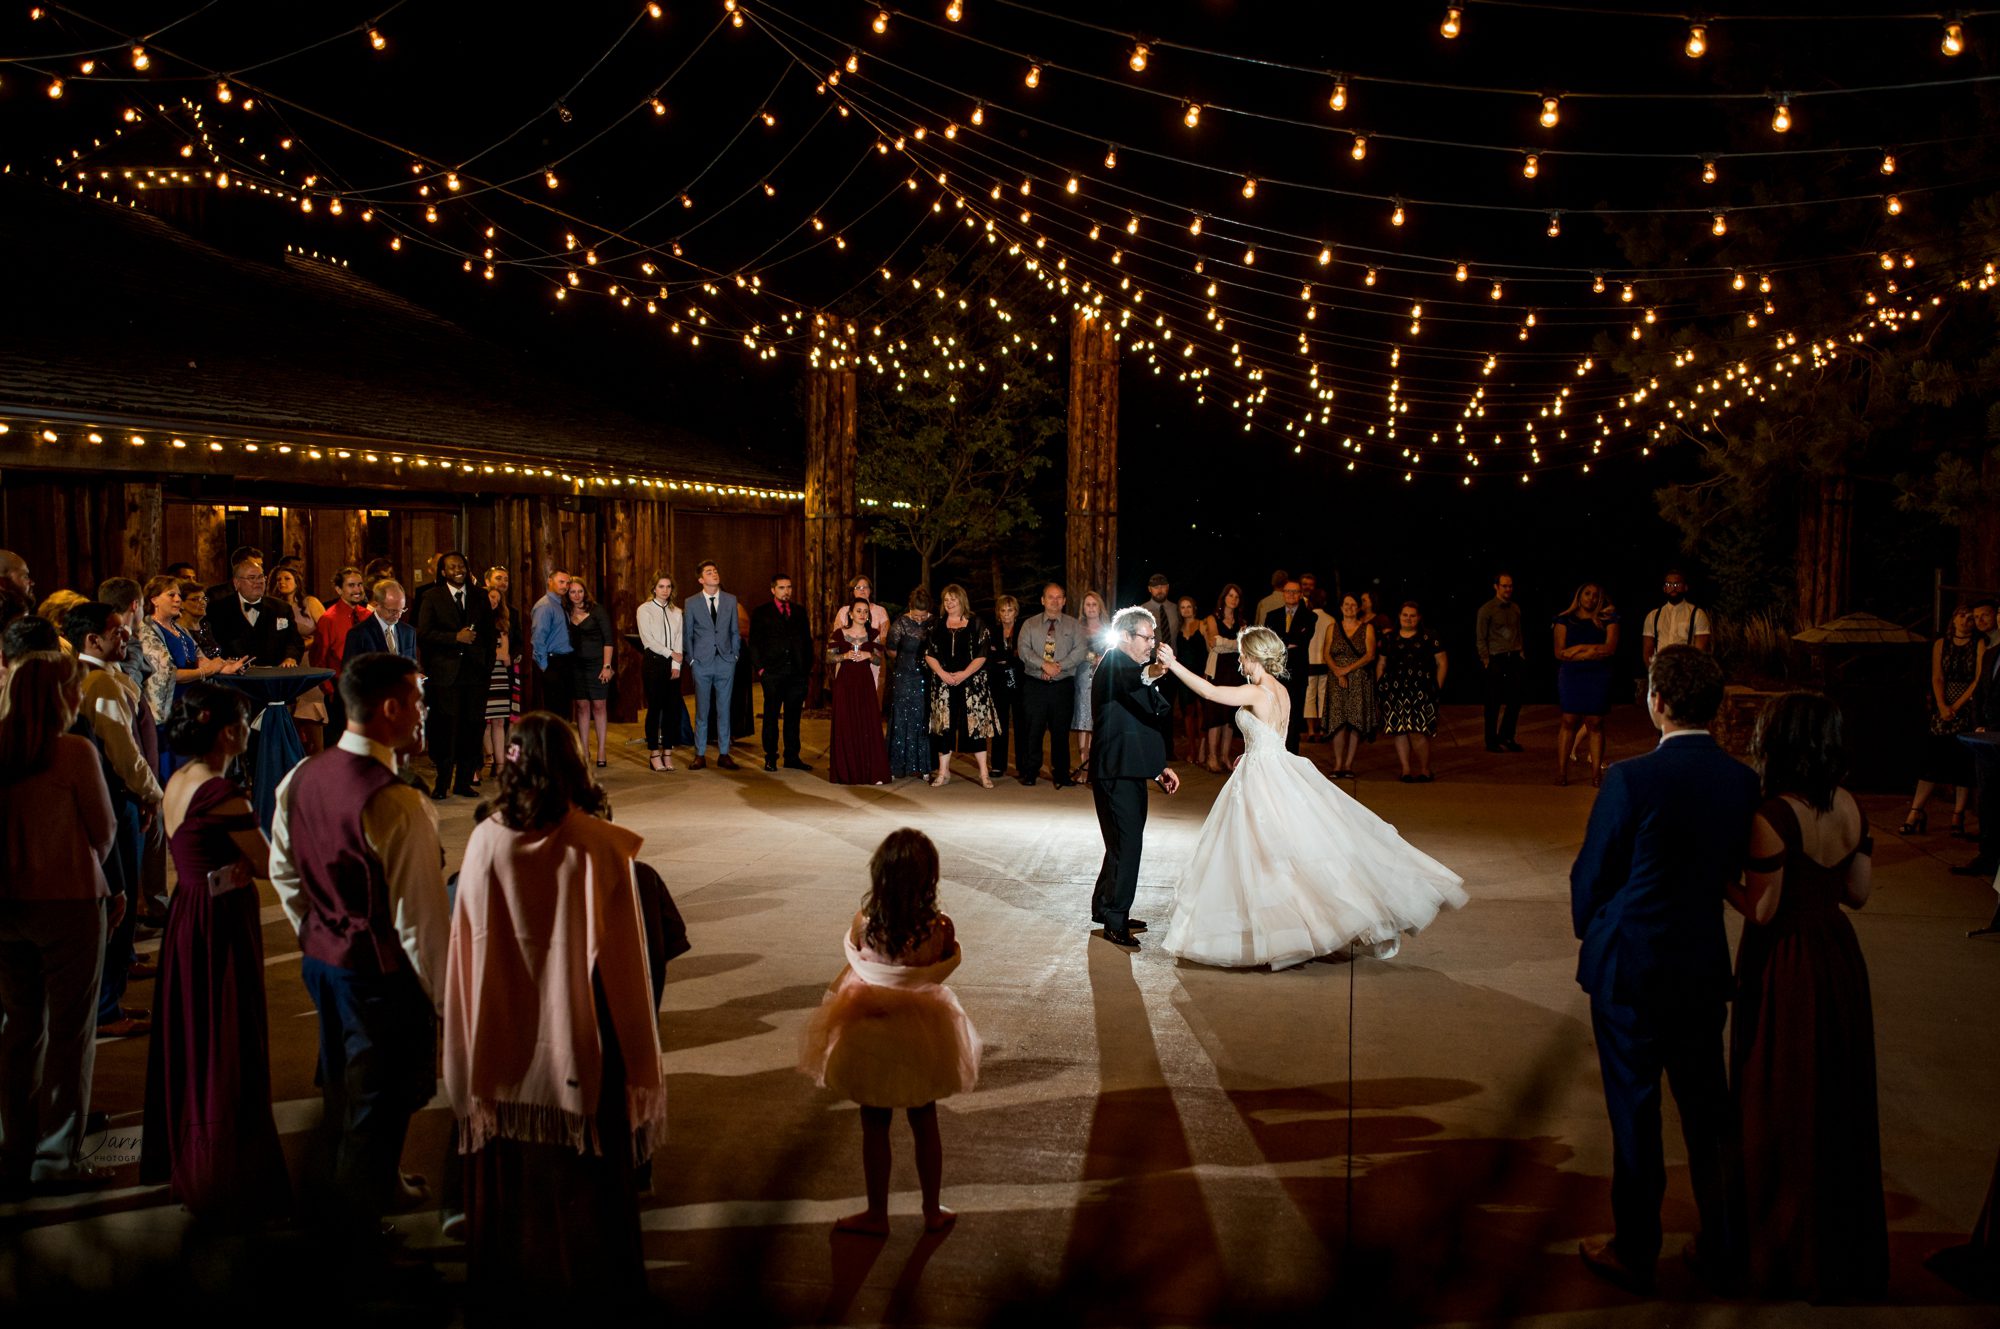 father spinning his daughter during the father/daughter dance at Spruce mountain ranch